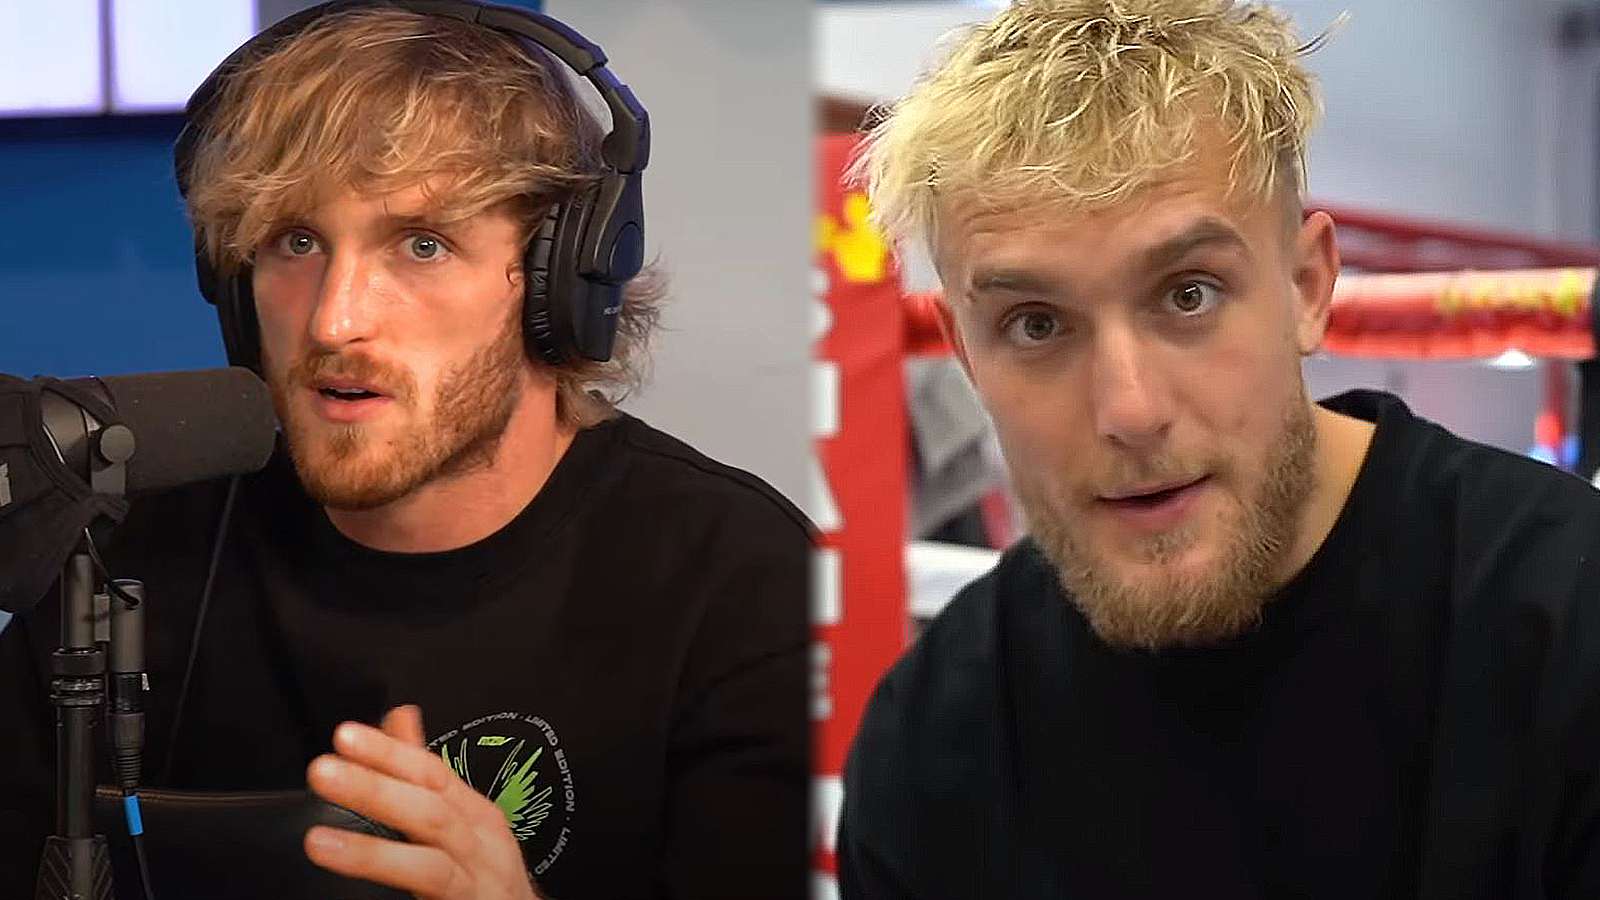 Logan Paul responds to Jake Paul fake fighter comments